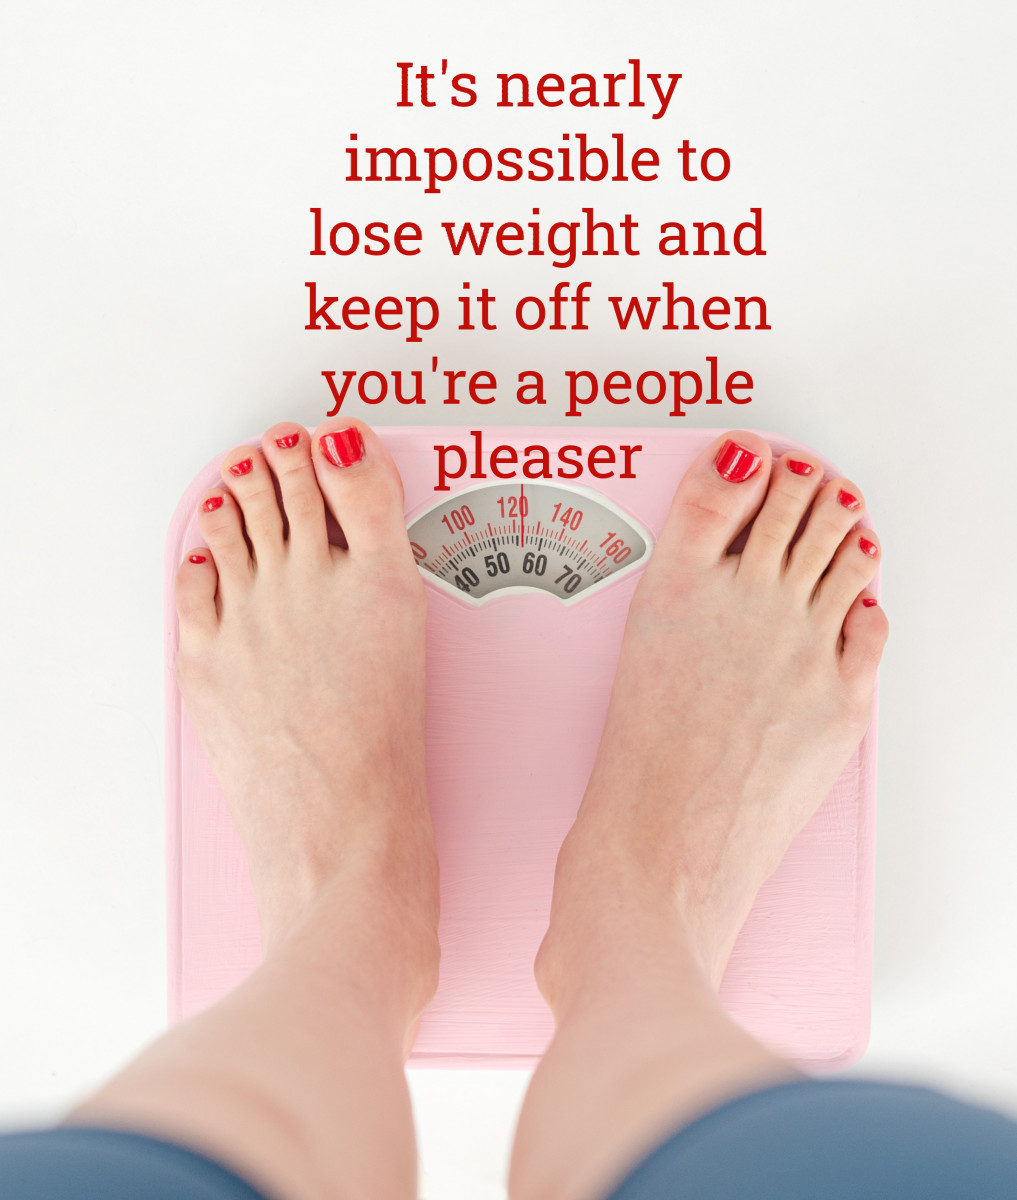 How to Stop Being a People-Pleaser and Finally Lose Weight for Good